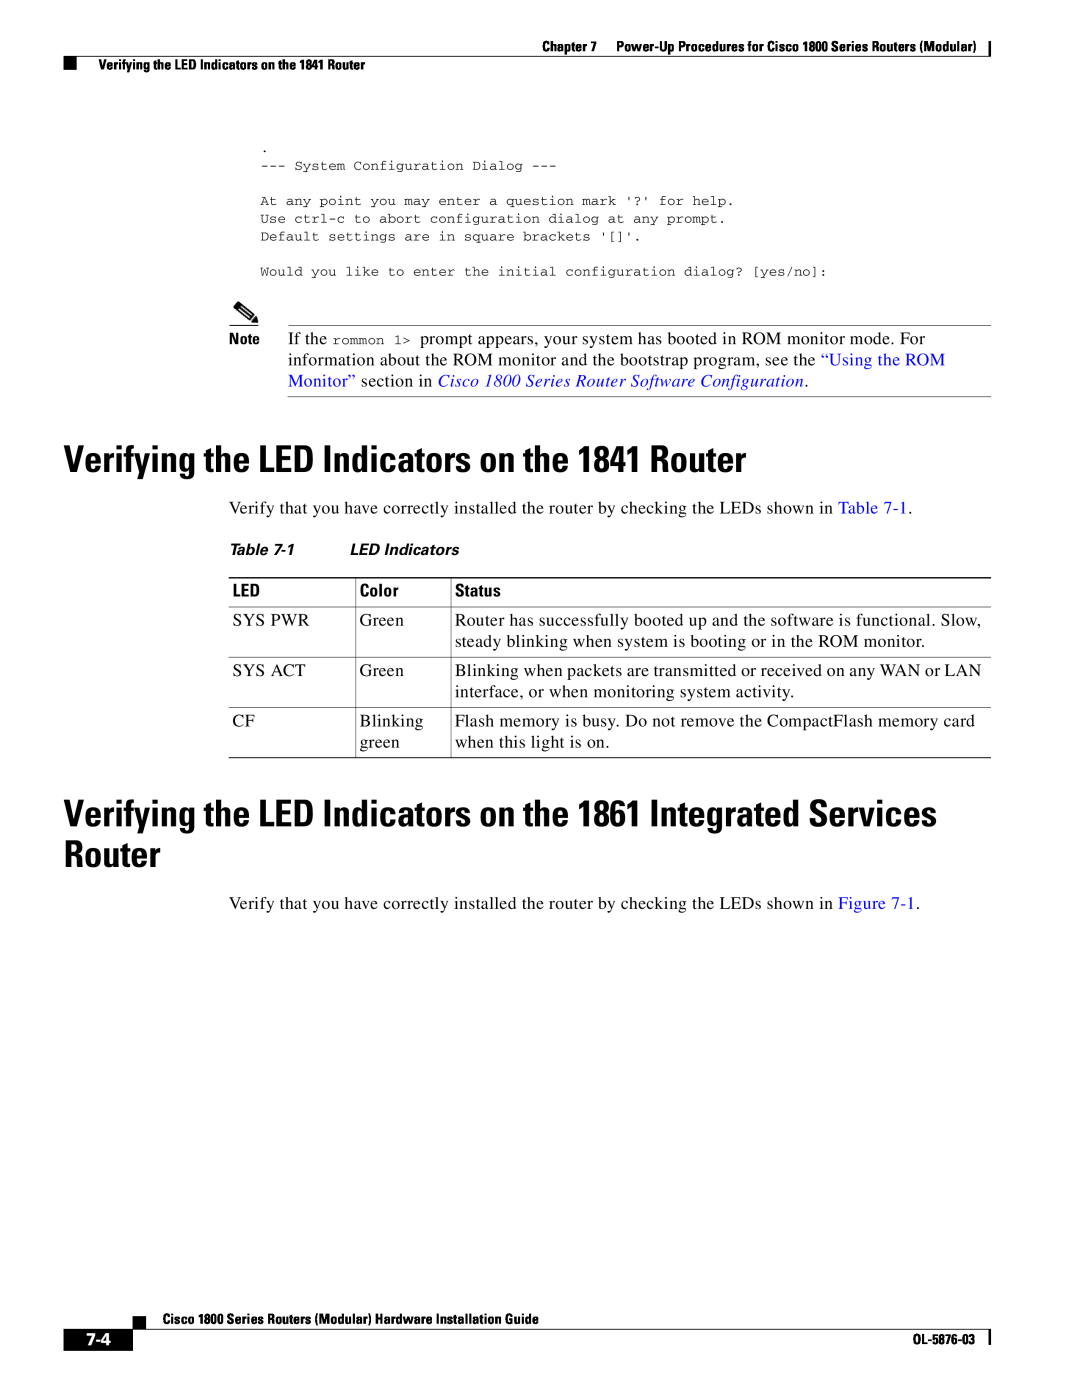 Cisco Systems CISCO1841-HSEC/K9-RF manual Verifying the LED Indicators on the 1841 Router 